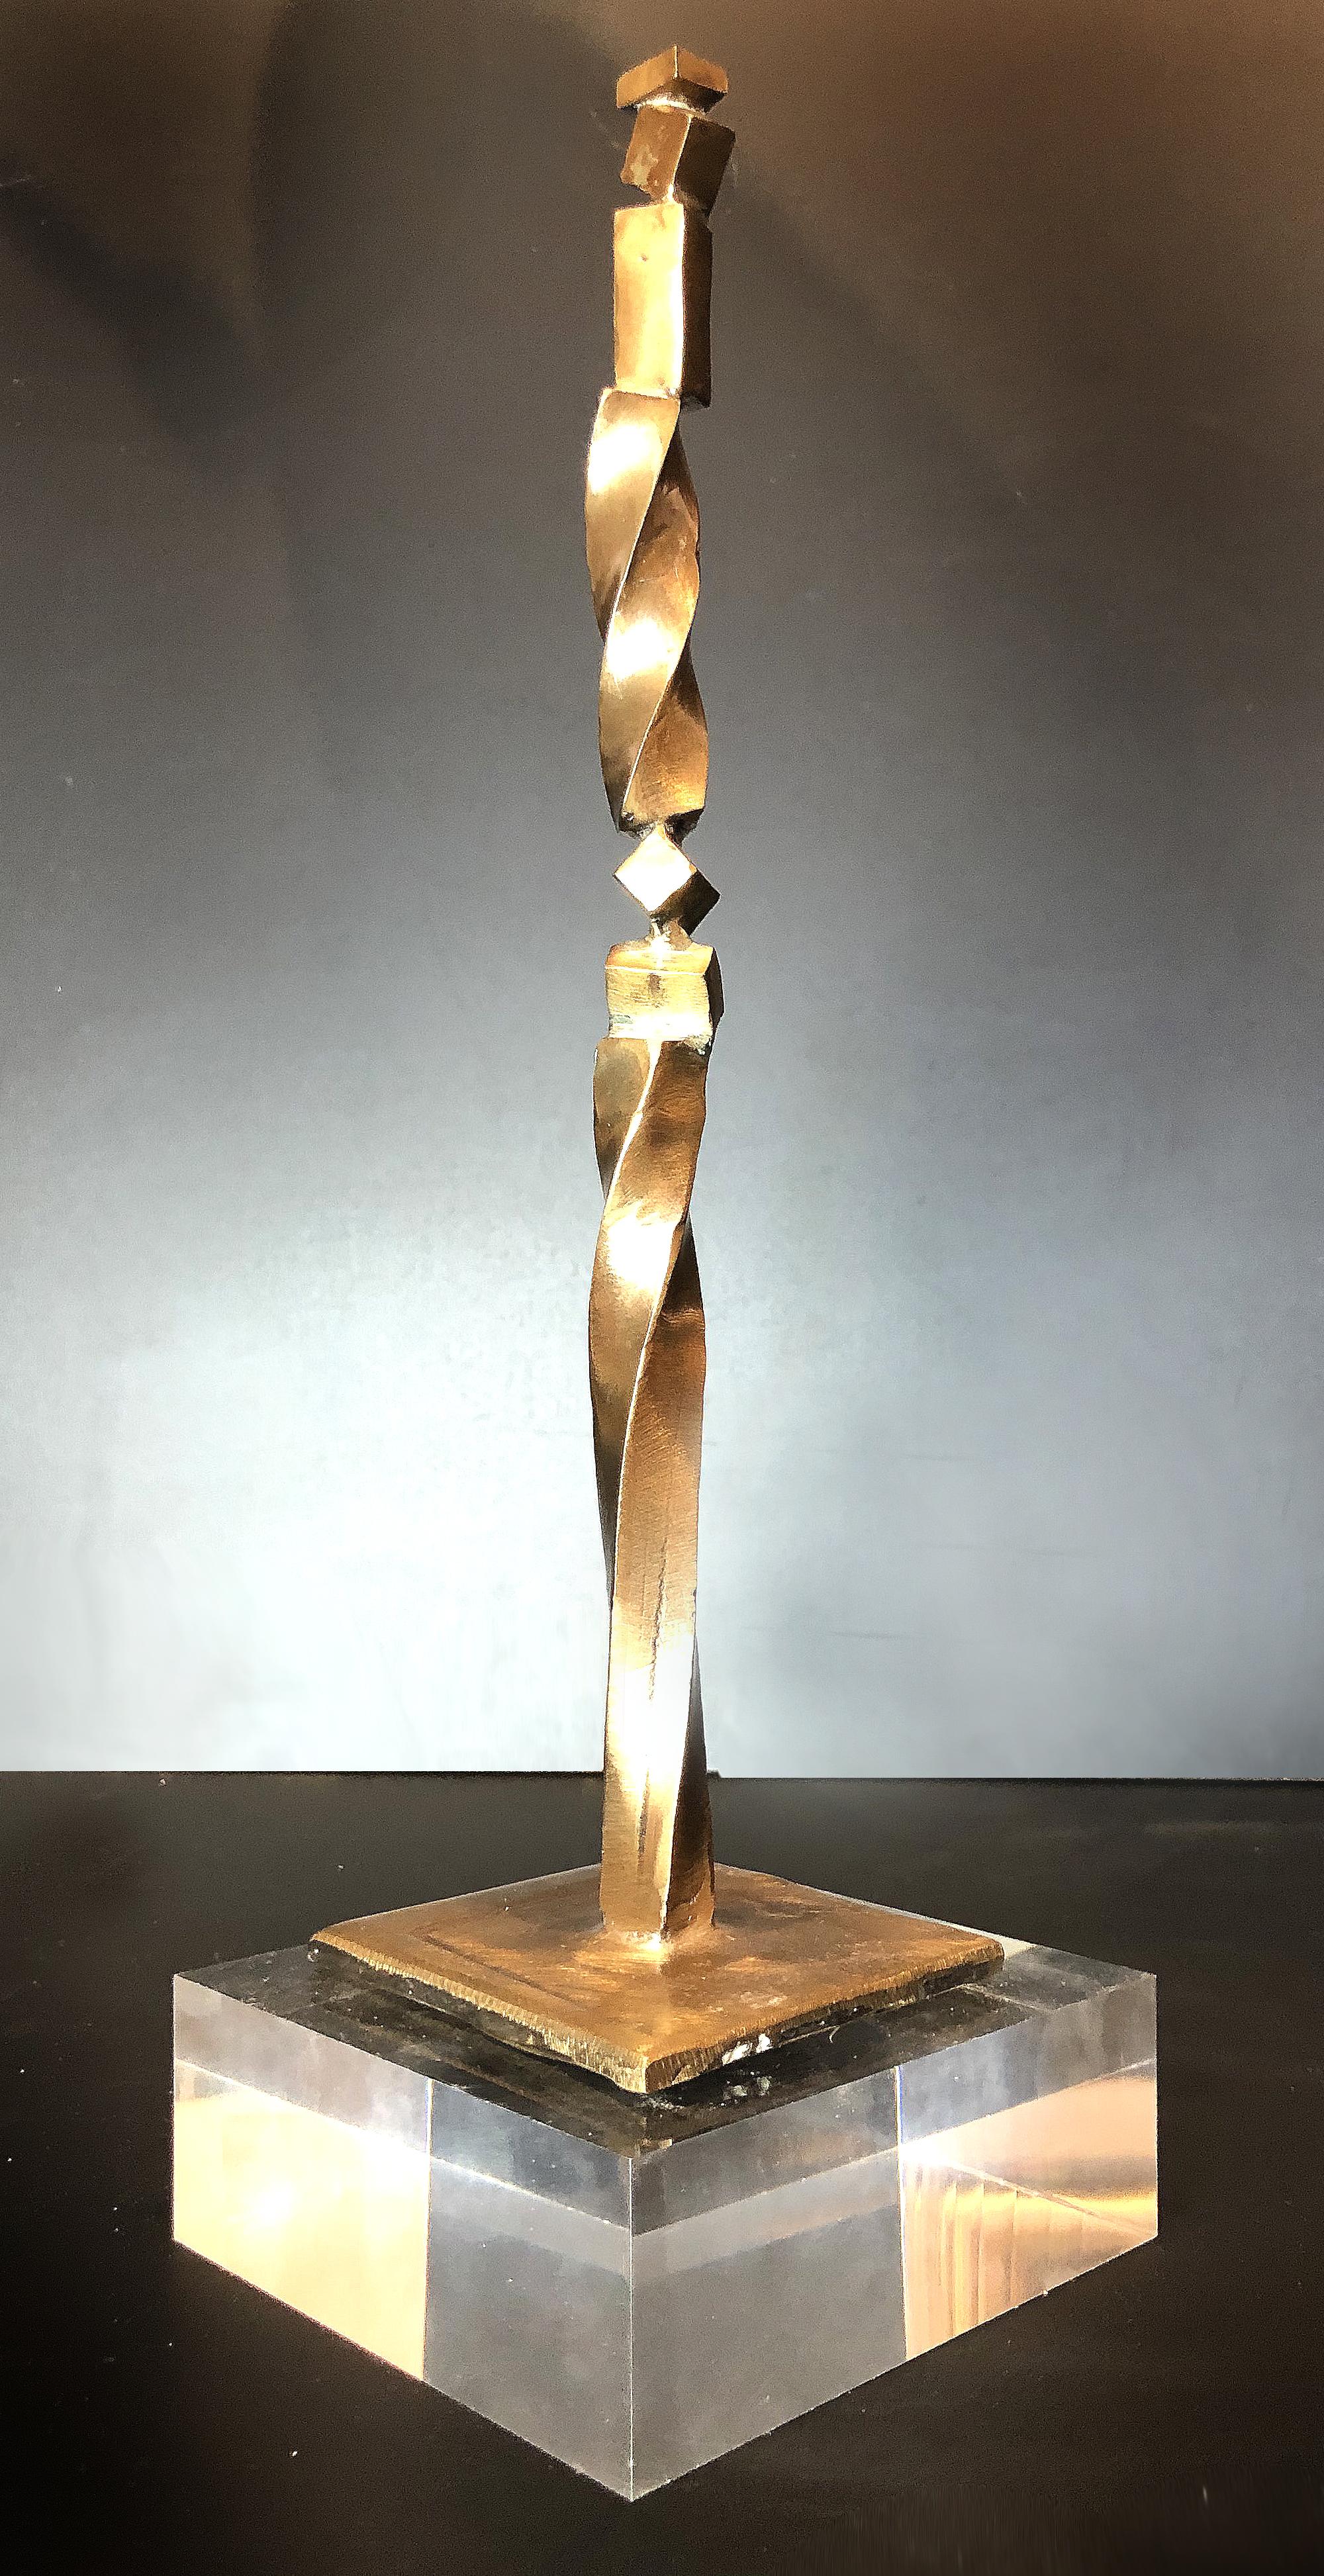 Bronze Brutalist sculpture mounted on Lucite, 1989

Offered for sale is an impeccably executed Brutalist bronze sculpture which is mounted on a substantial Lucite base. The sculpture is signed and dated 1989. The sculpture is viewed from all sides